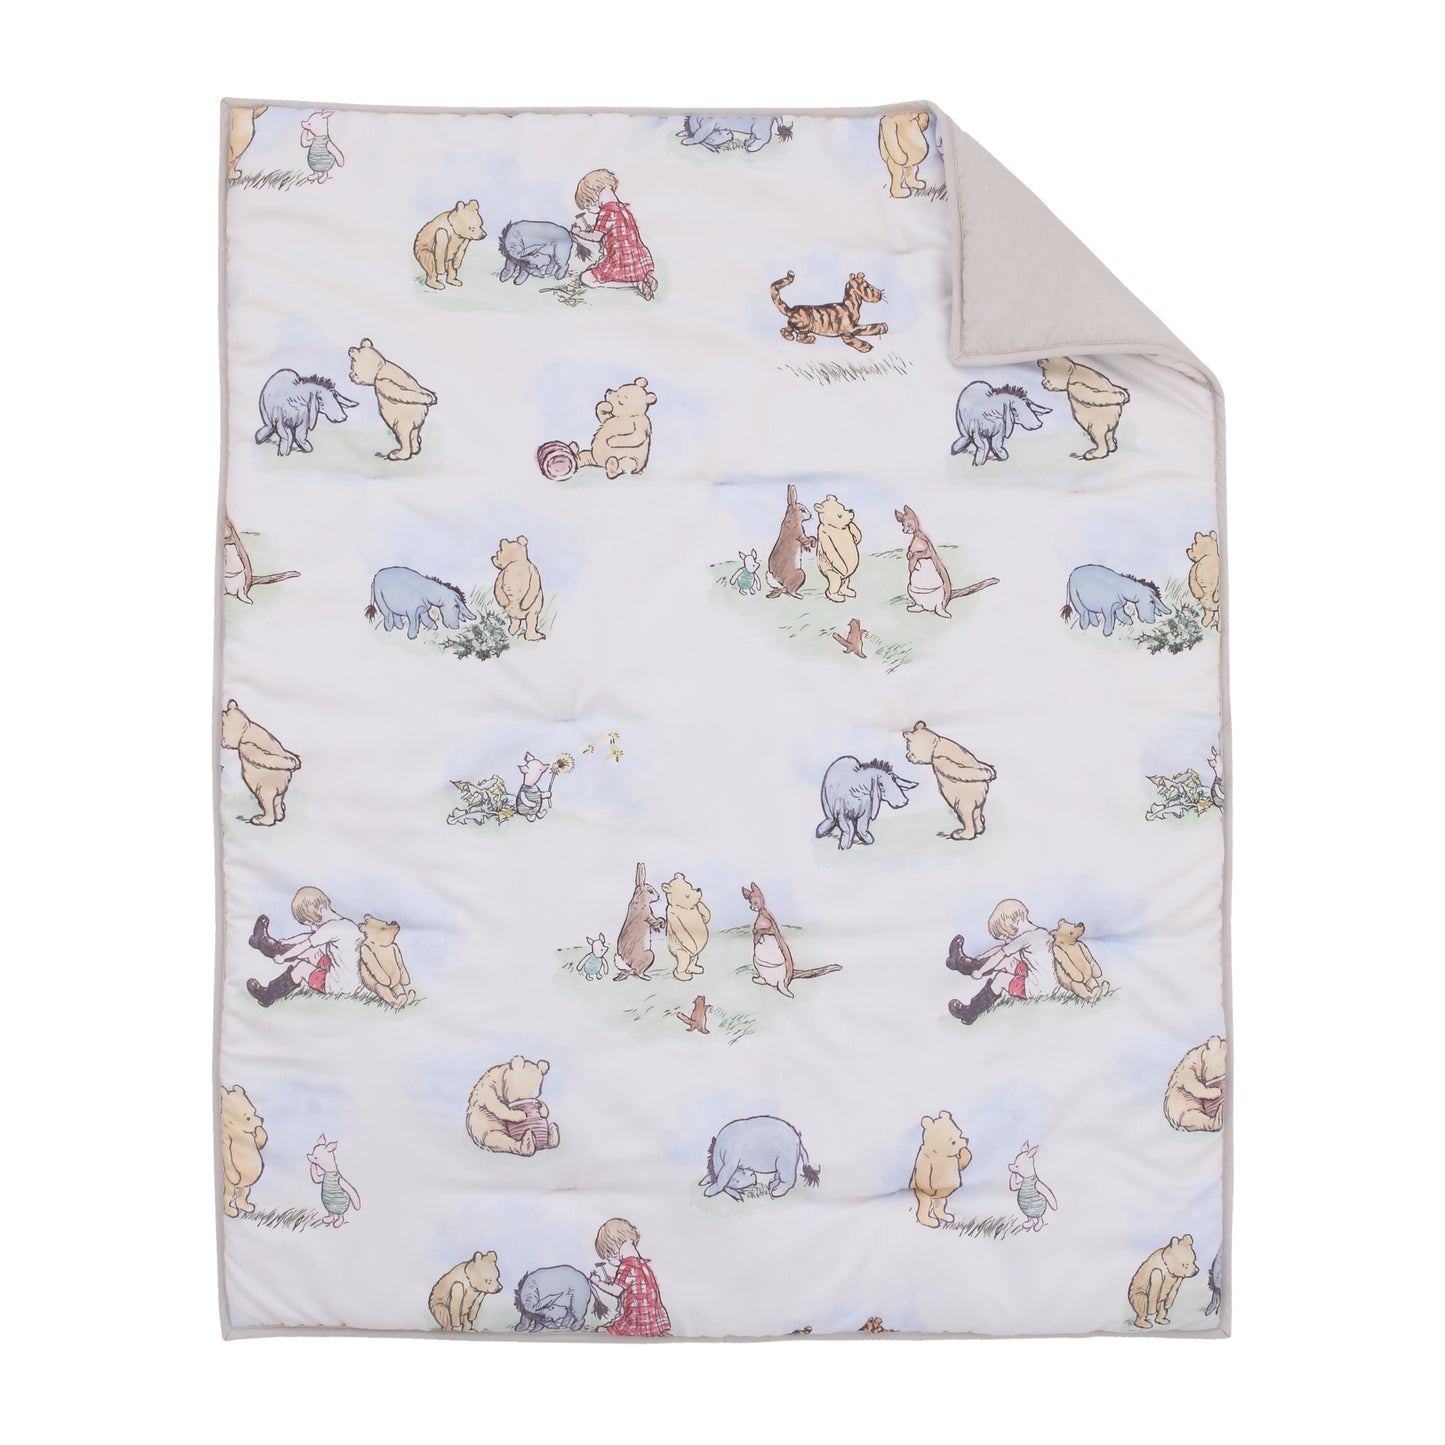 Disney Winnie the Pooh Classic Pooh Ivory, Blue, Sage, Tan Storybook 6 Piece Nursery Crib Bedding Set - Comforter, 2 Fitted Crib Sheets, Dust Ruffle, Baby Blanket, Changing Pad Cover